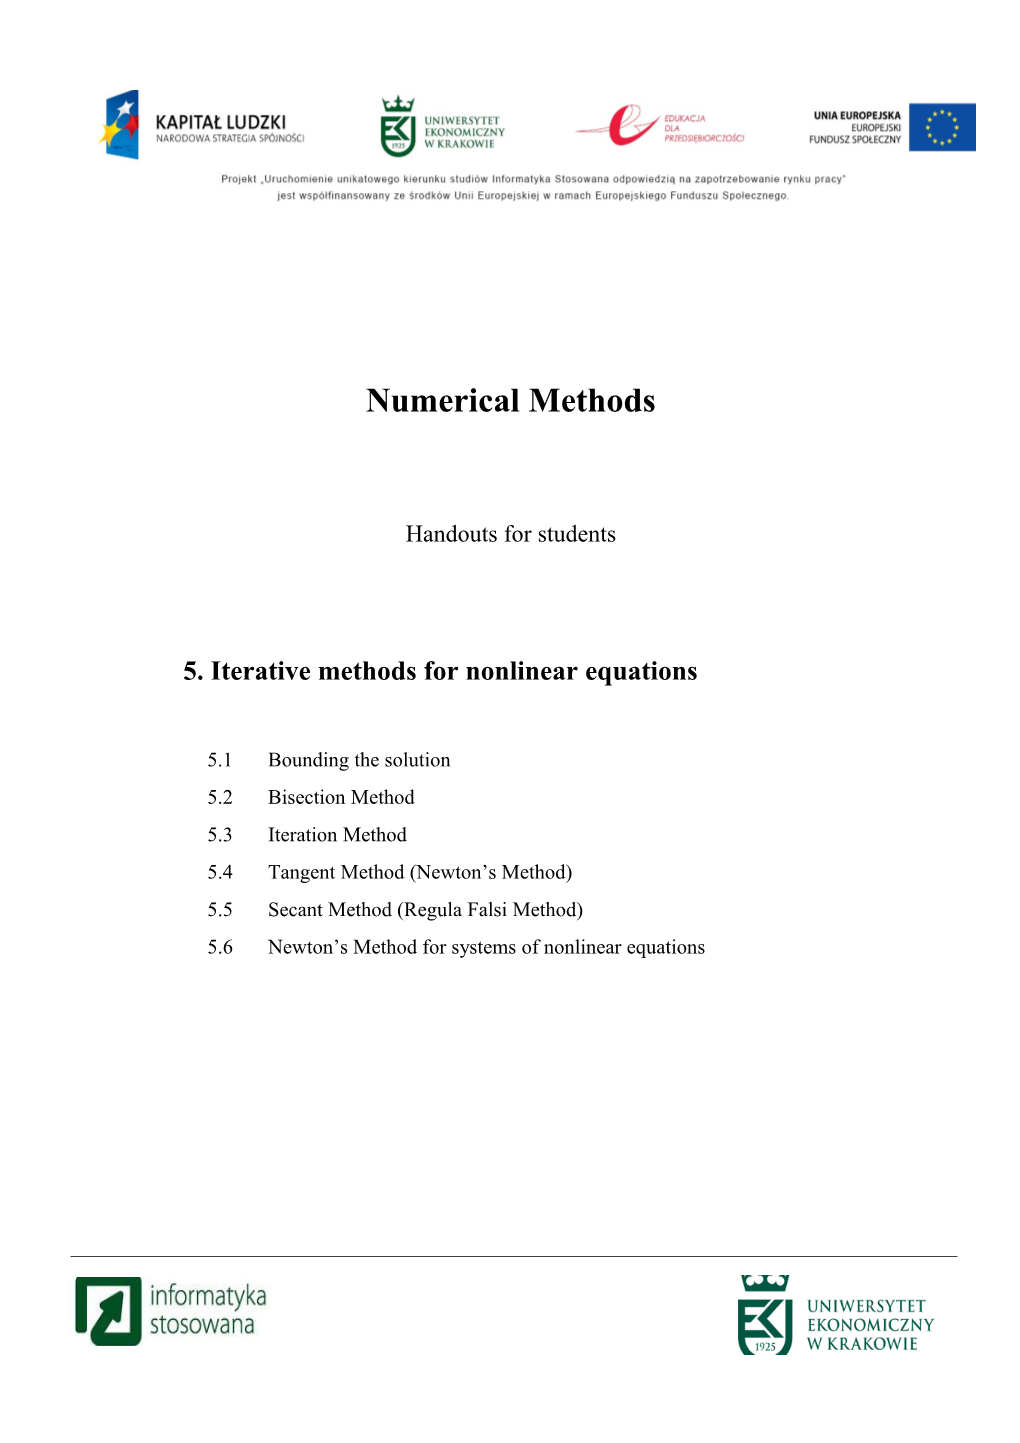 Numerical Methods 5. Iterative Methods for Nonlinear Equations